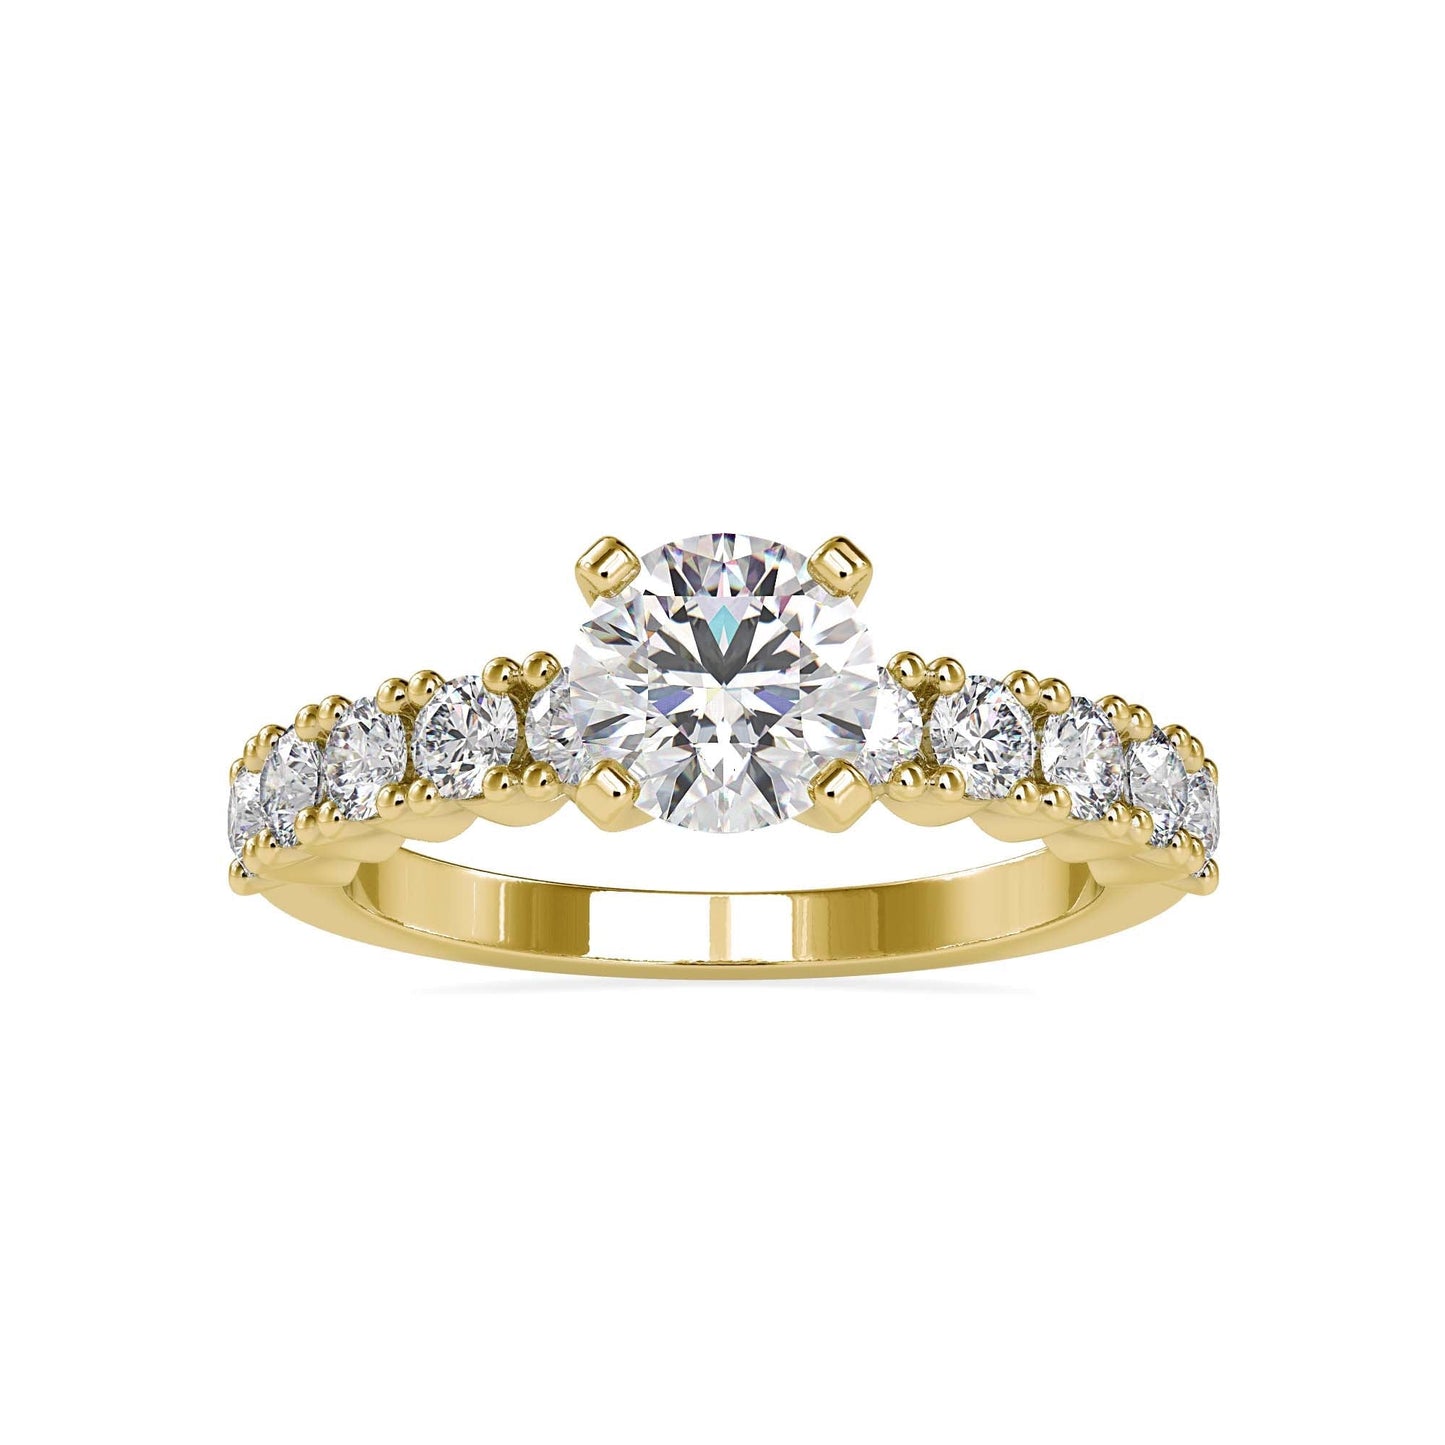 Our Guide to Champagne Diamond Engagement Rings - Lebrusan Studio